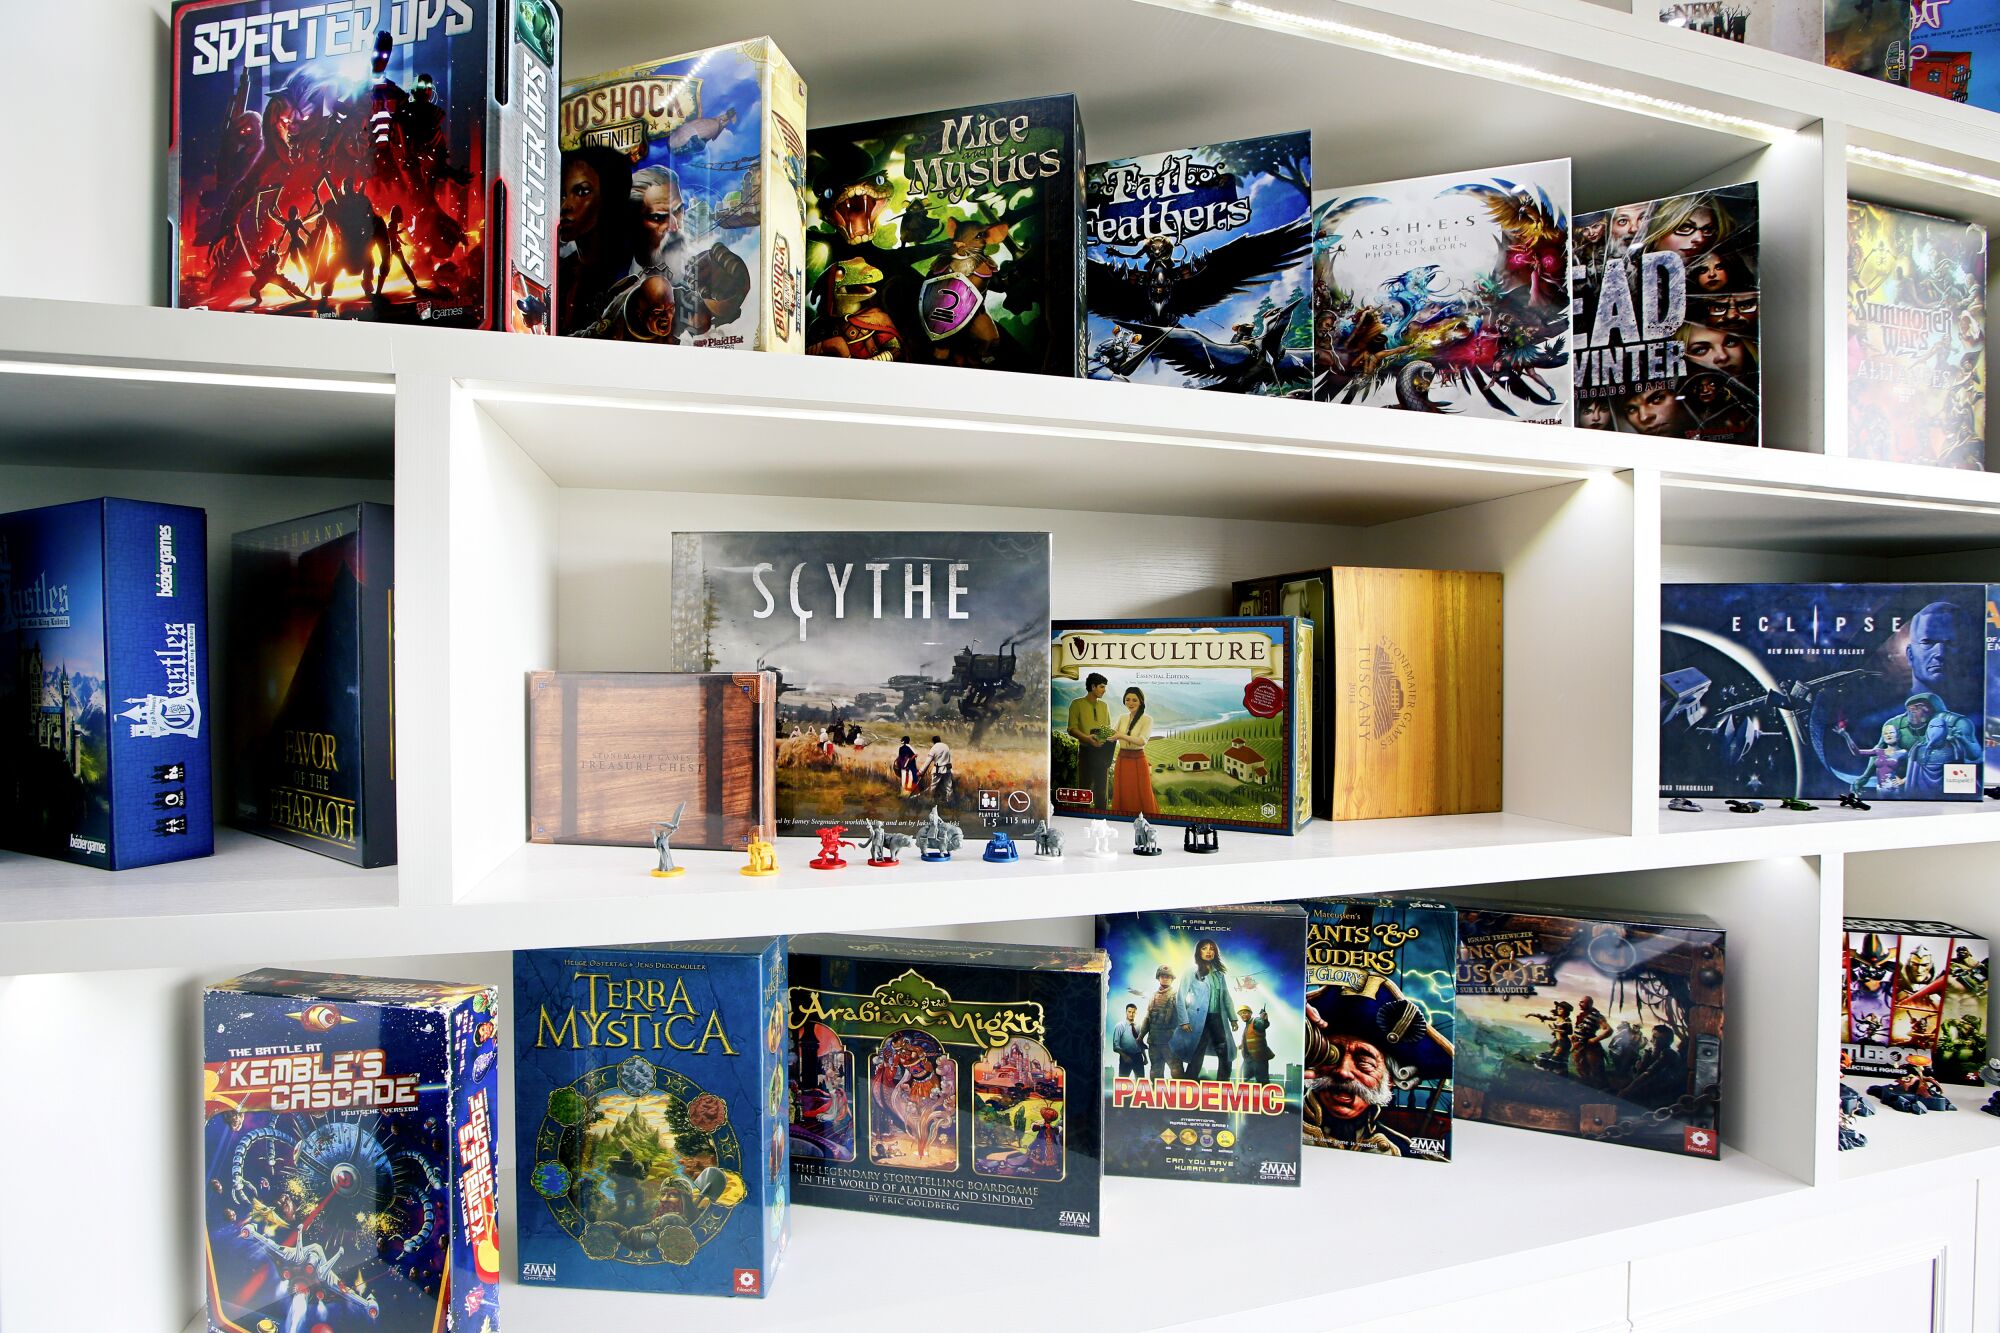 Shelves at the Panda Game Manufacturing factory in Shenzhen display some of the board games from Stonemaier and others.